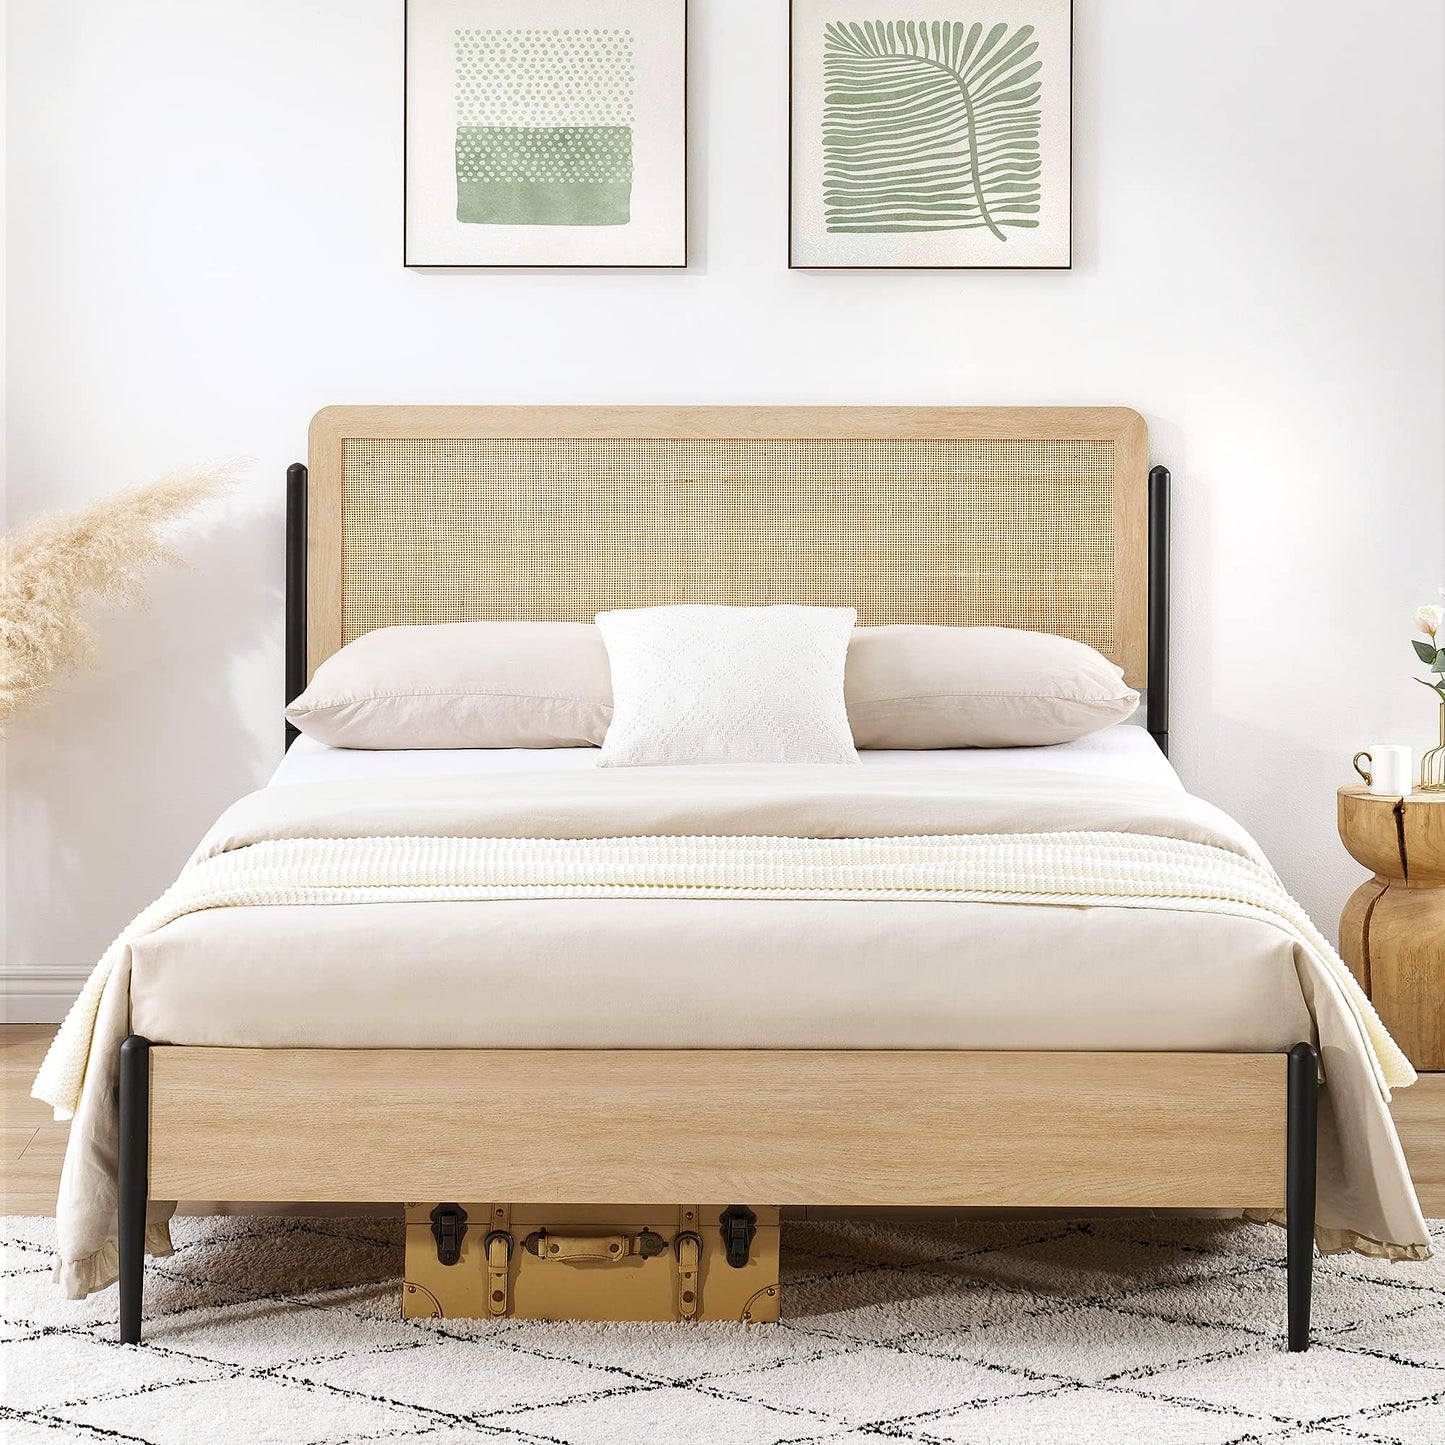 GAOMON Full Metal Bed Frame with Curved Rattan Headboard and Wooden Footboard,Modern Platform Bed Frame with Underbed Storage Space,Noiseless,No